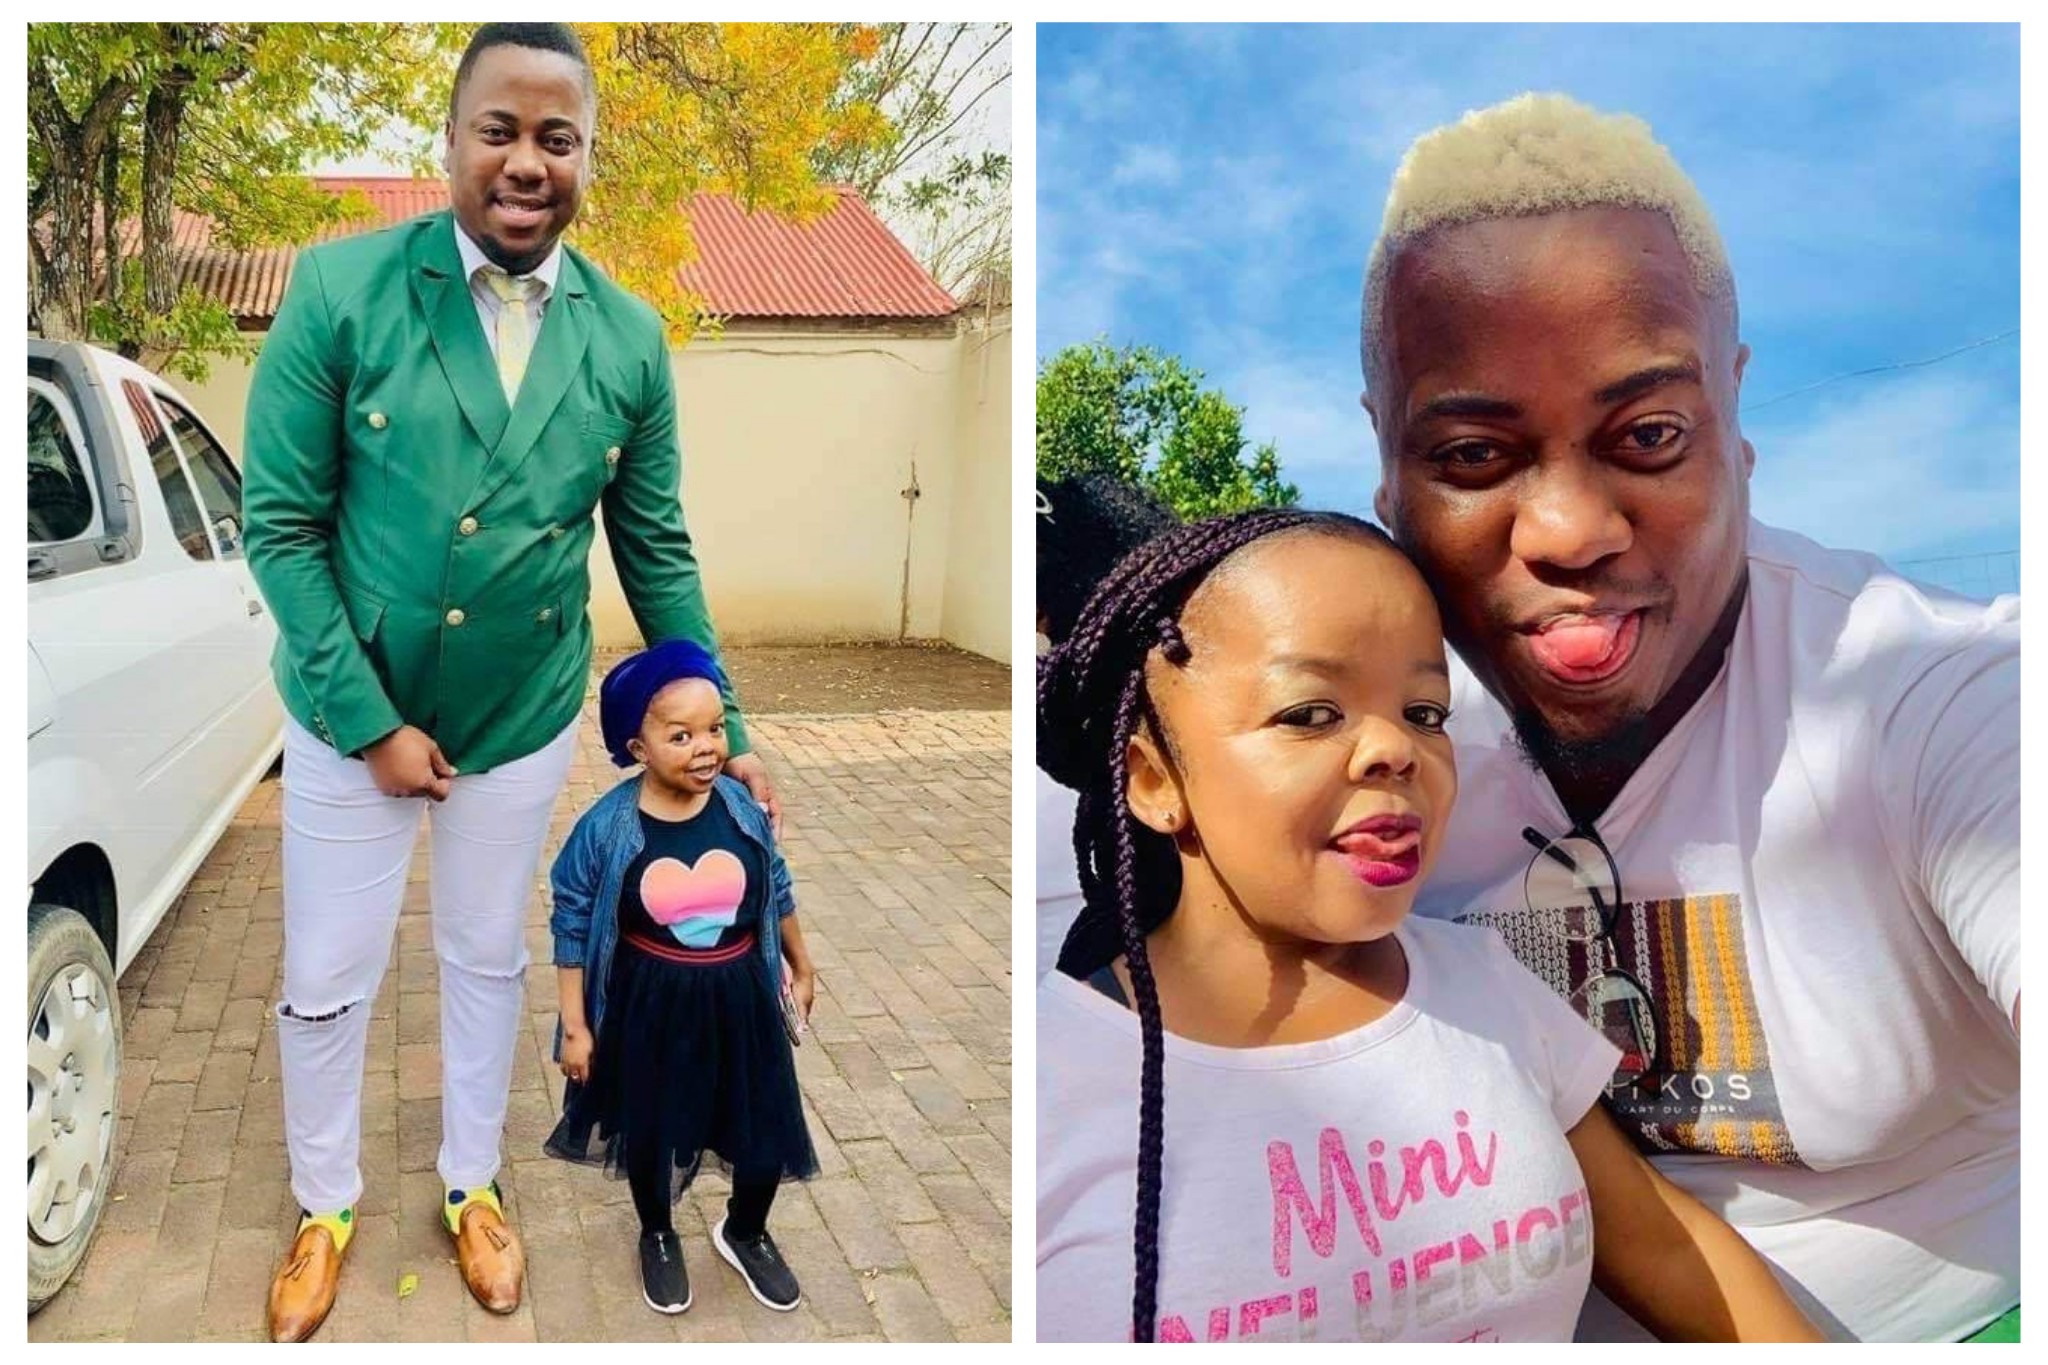 Mzansi reacts to Vovo's baby daddy as he recently revealed himself. Love is a beautiful thing 1